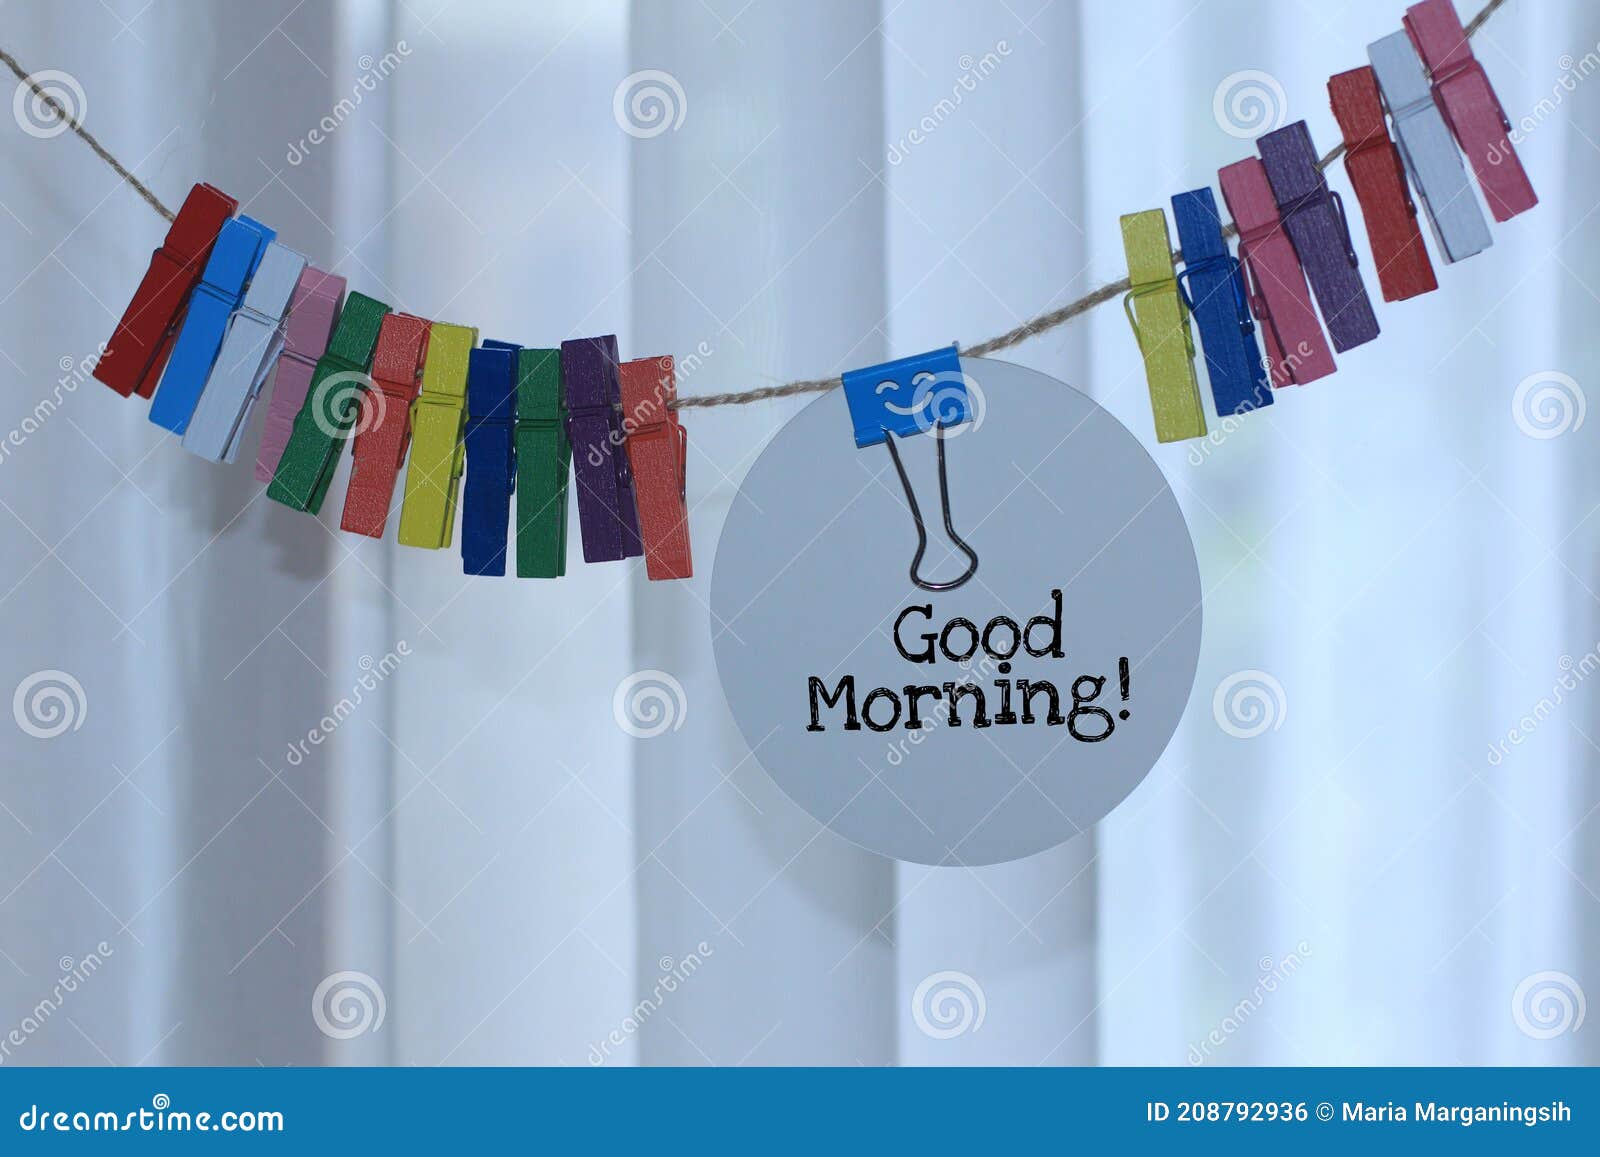 Good Morning. Fresh Good Morning Greeting Concept with Text Notes ...